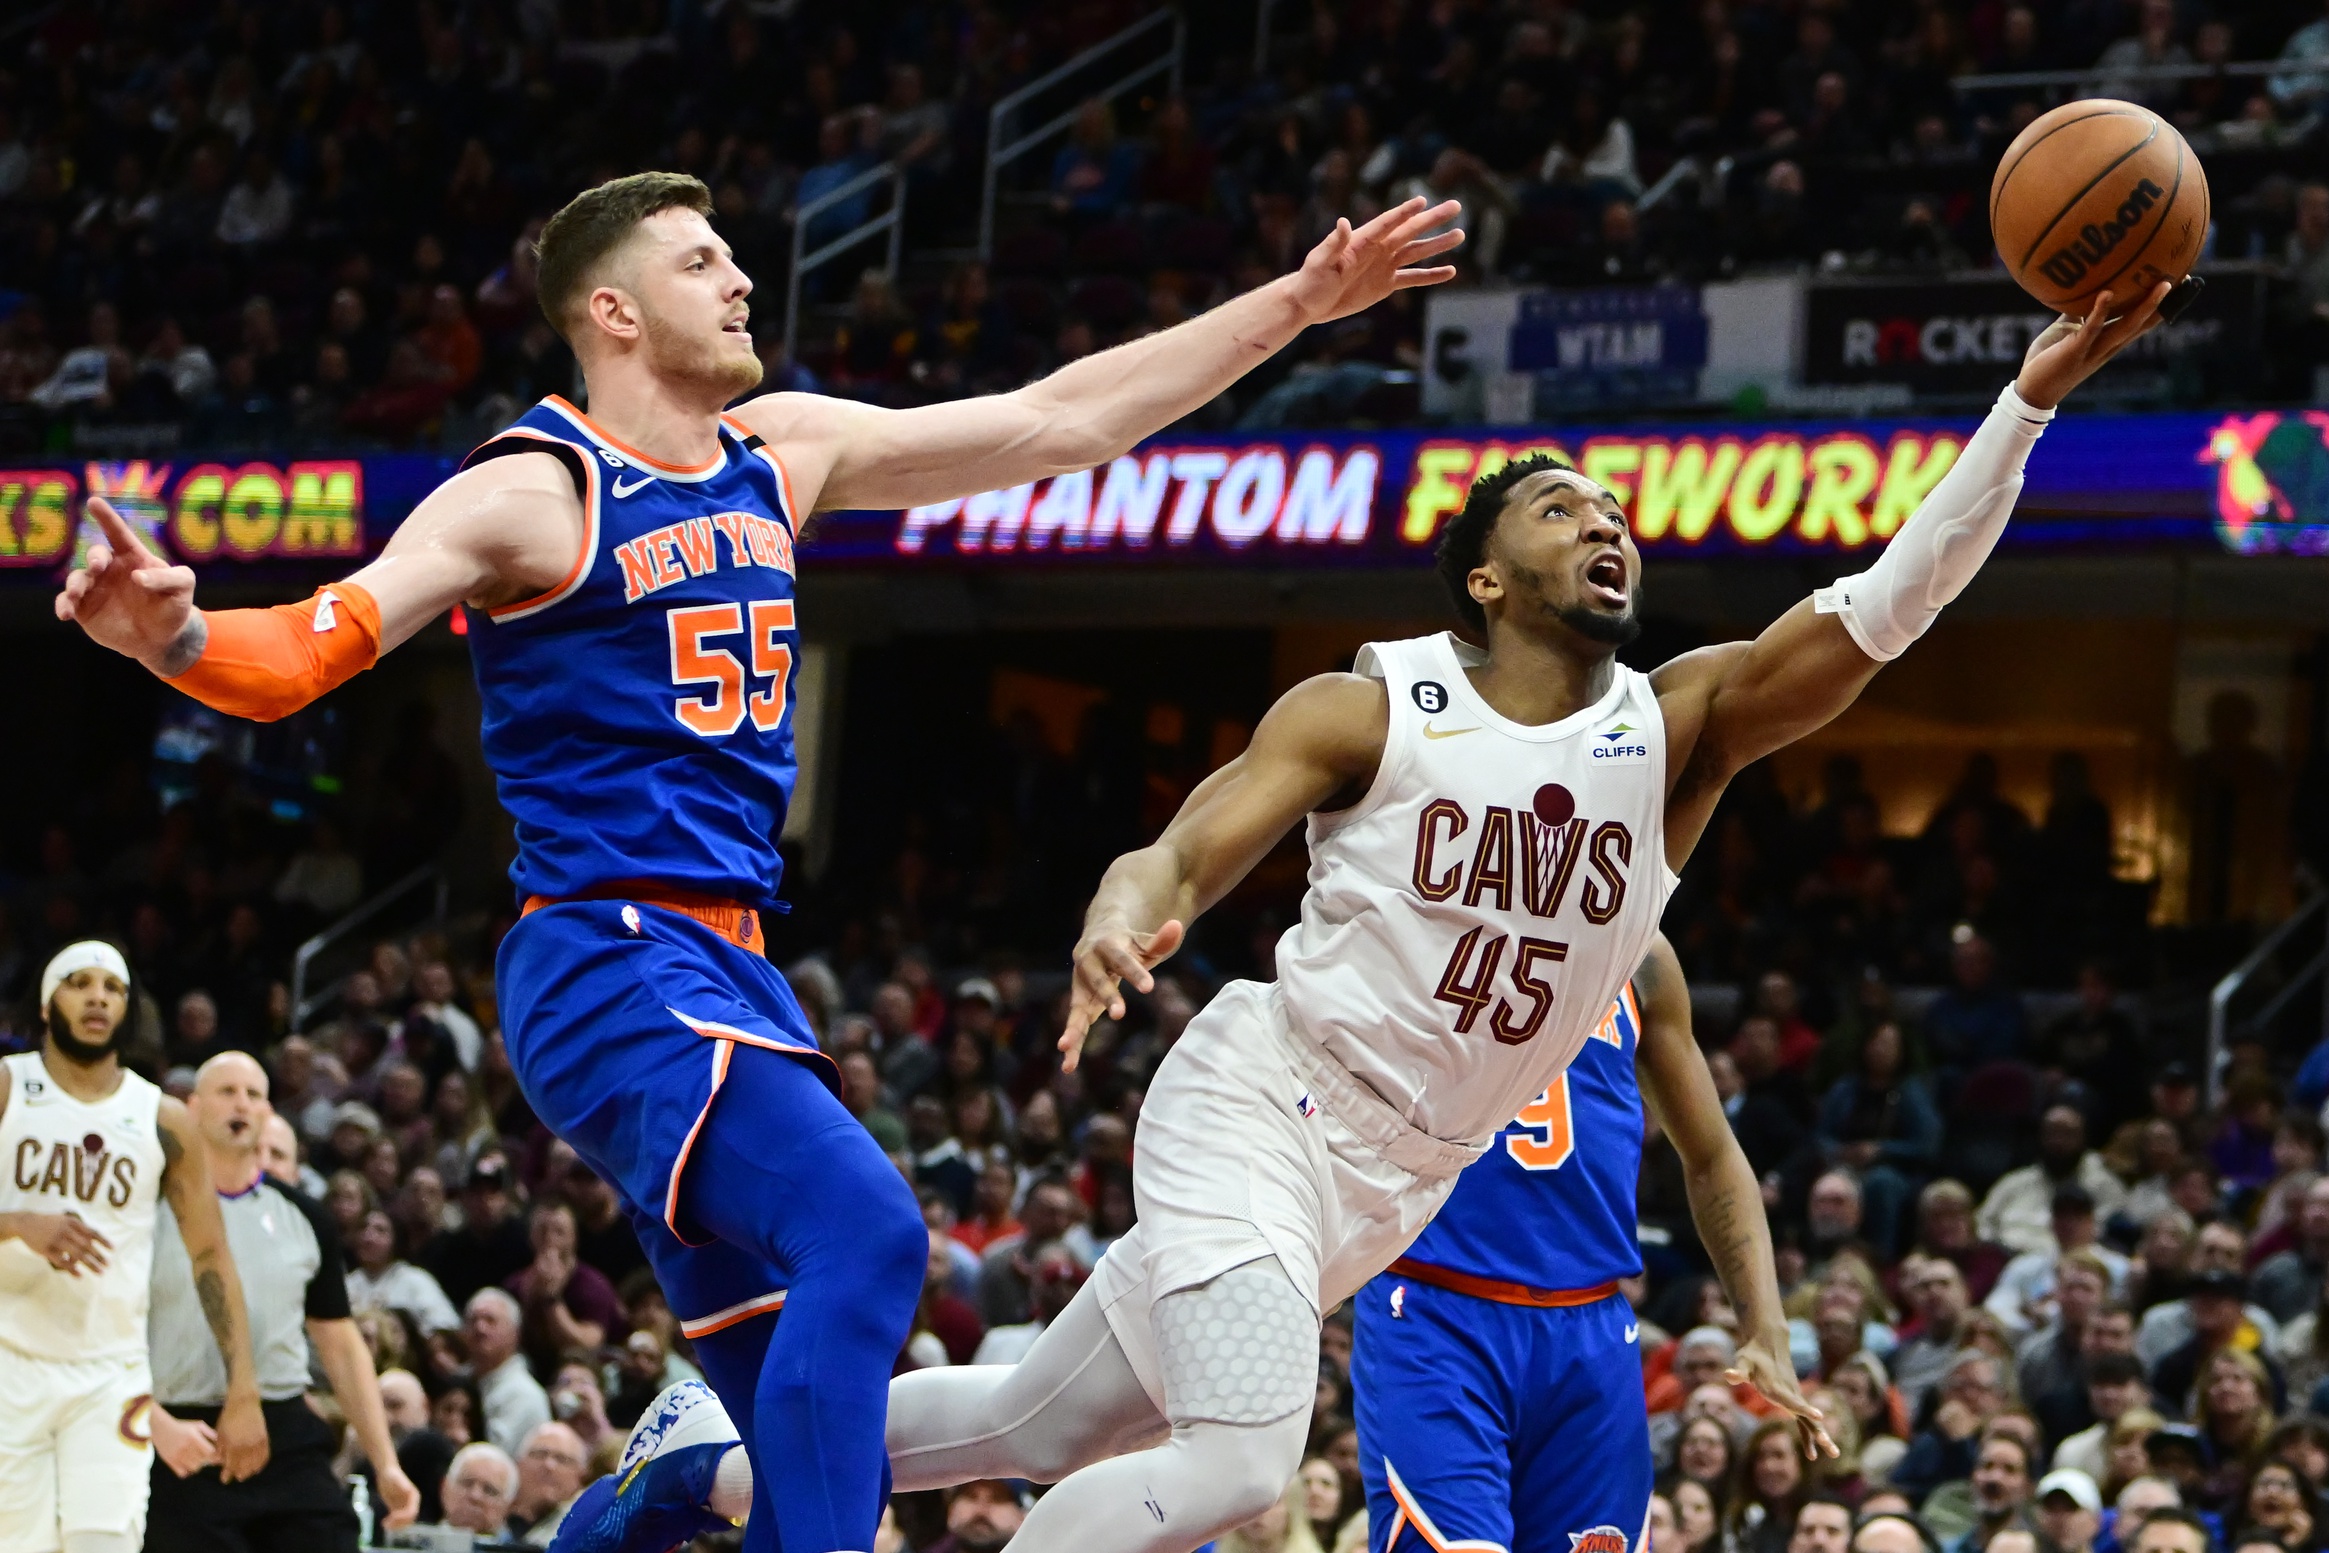 Mar 31, 2023; Cleveland, Ohio, USA; Cleveland Cavaliers guard Donovan Mitchell (45) drives to the basket against New York Knicks center Isaiah Hartenstein (55) during the second half at Rocket Mortgage FieldHouse. Mandatory Credit: Ken Blaze-USA TODAY Sports